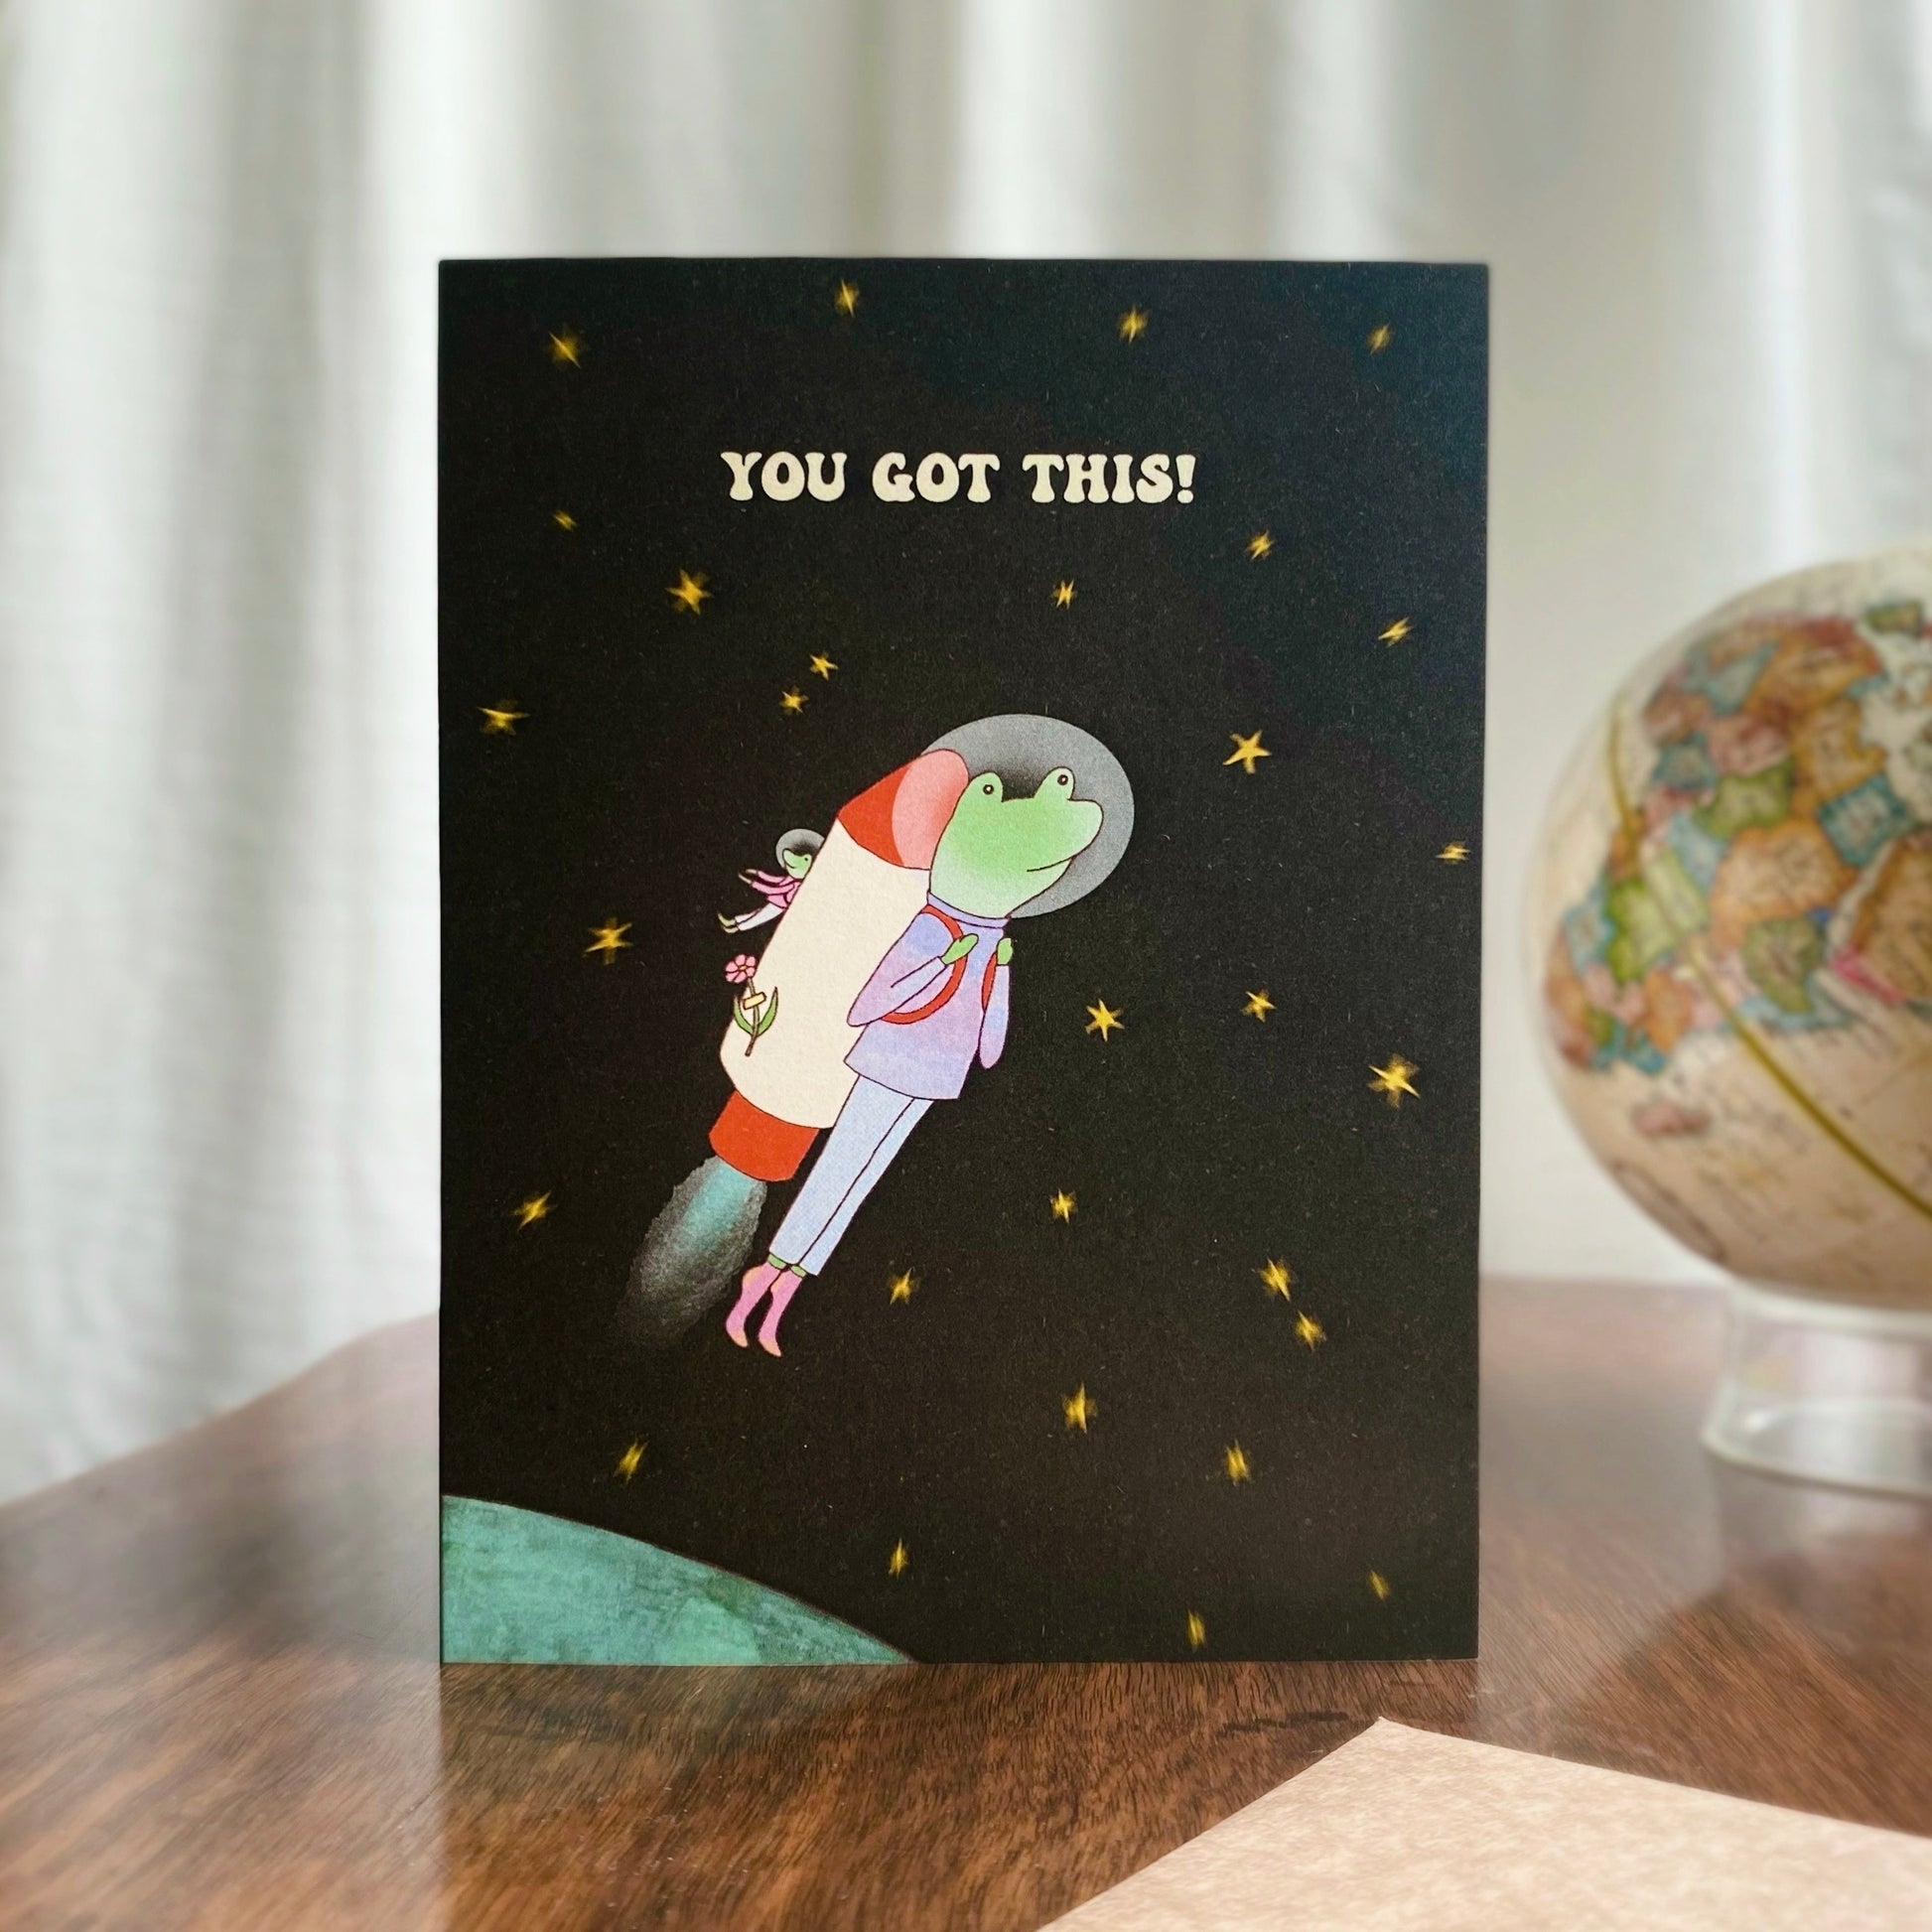 Inspiring encouragement card with the illustration of a frog as an astronaut heading to the universe with a rocket machine on his back